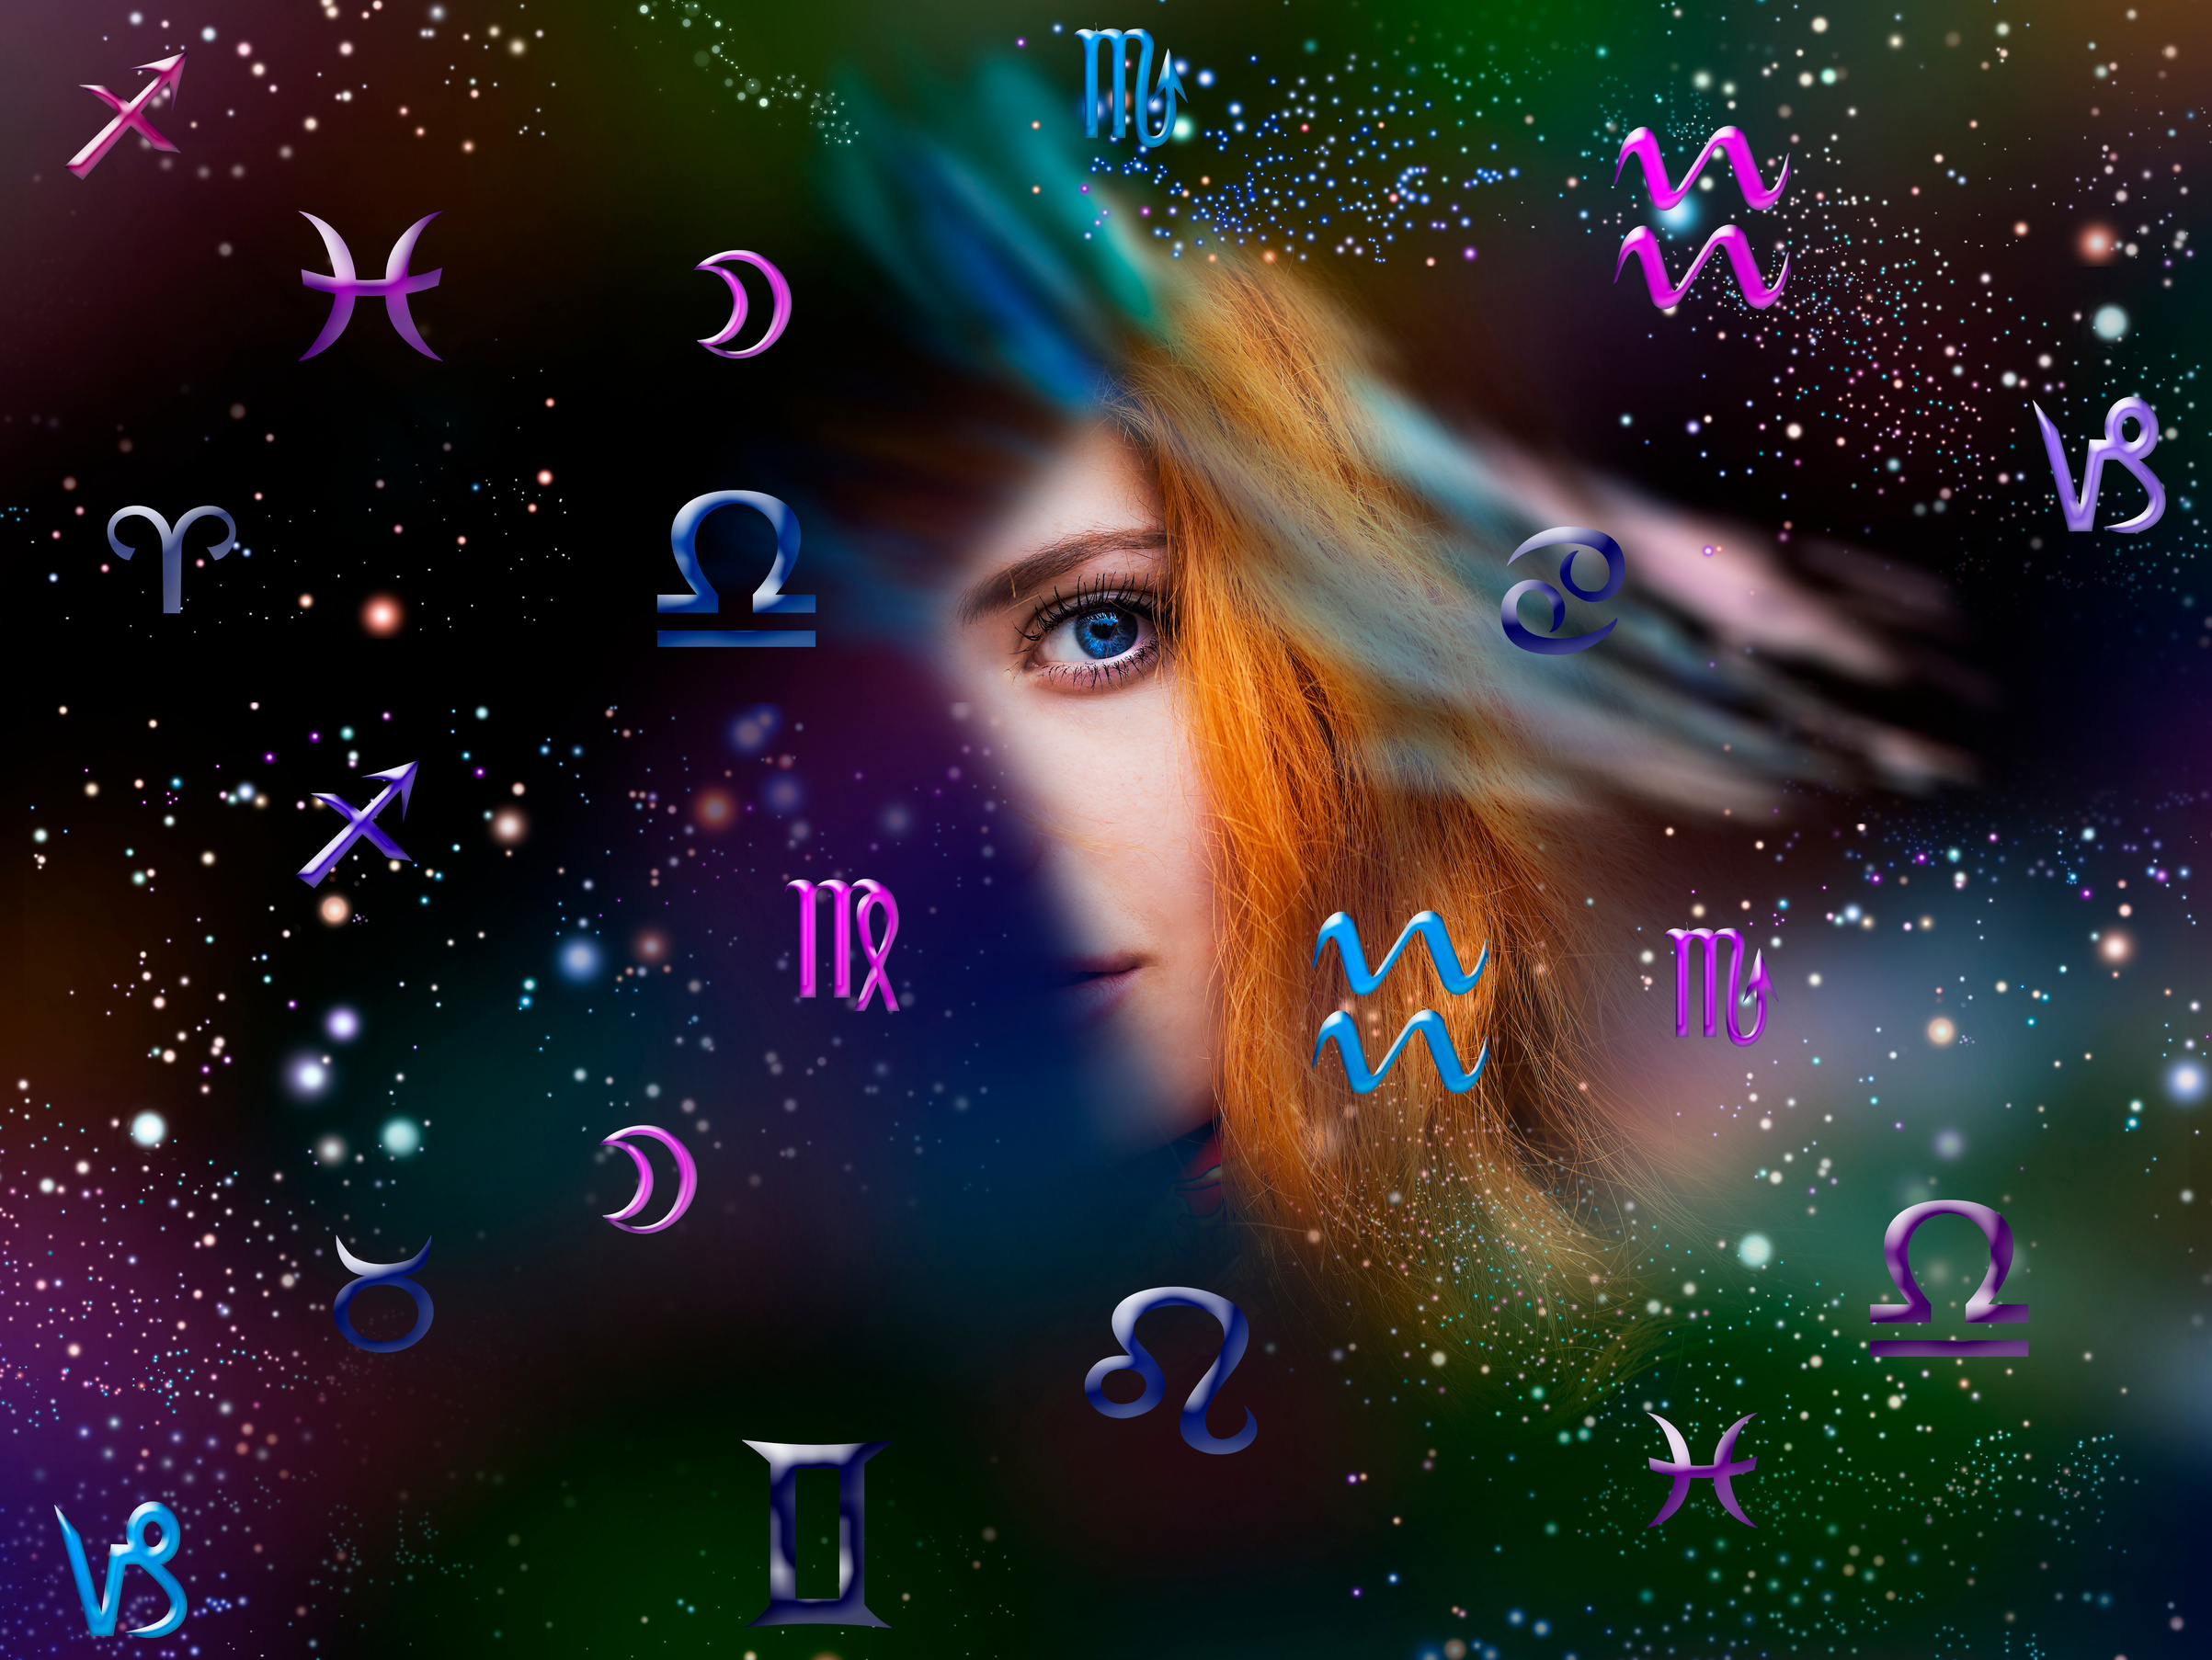 Astrology, twelve zodiac signs, the woman in esoterics